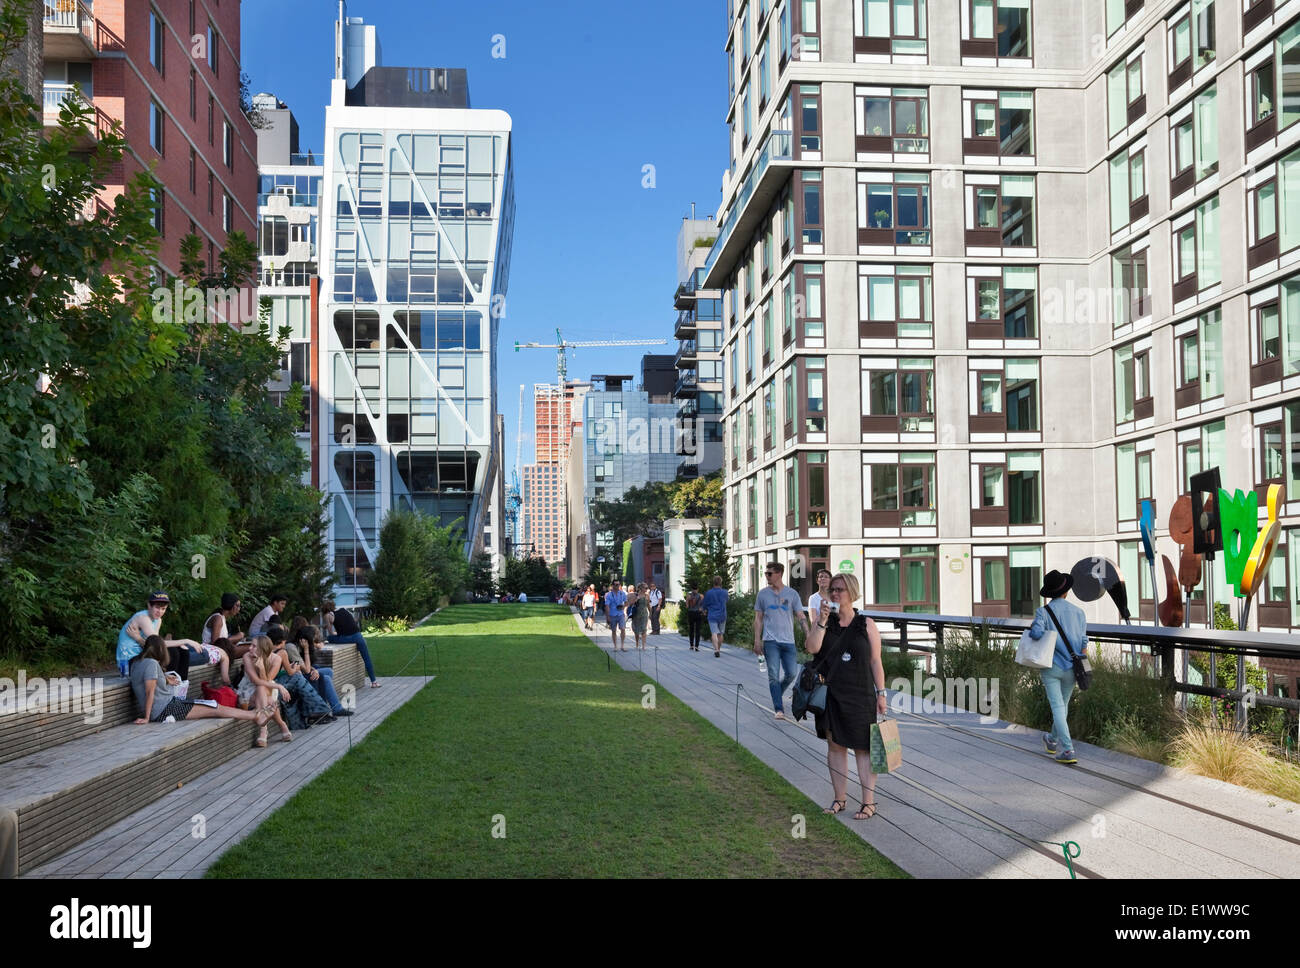 One-mile long, narrow urban park built in 2009 on what was formerly the elevated train tracks of New York Central Railroad. The Stock Photo